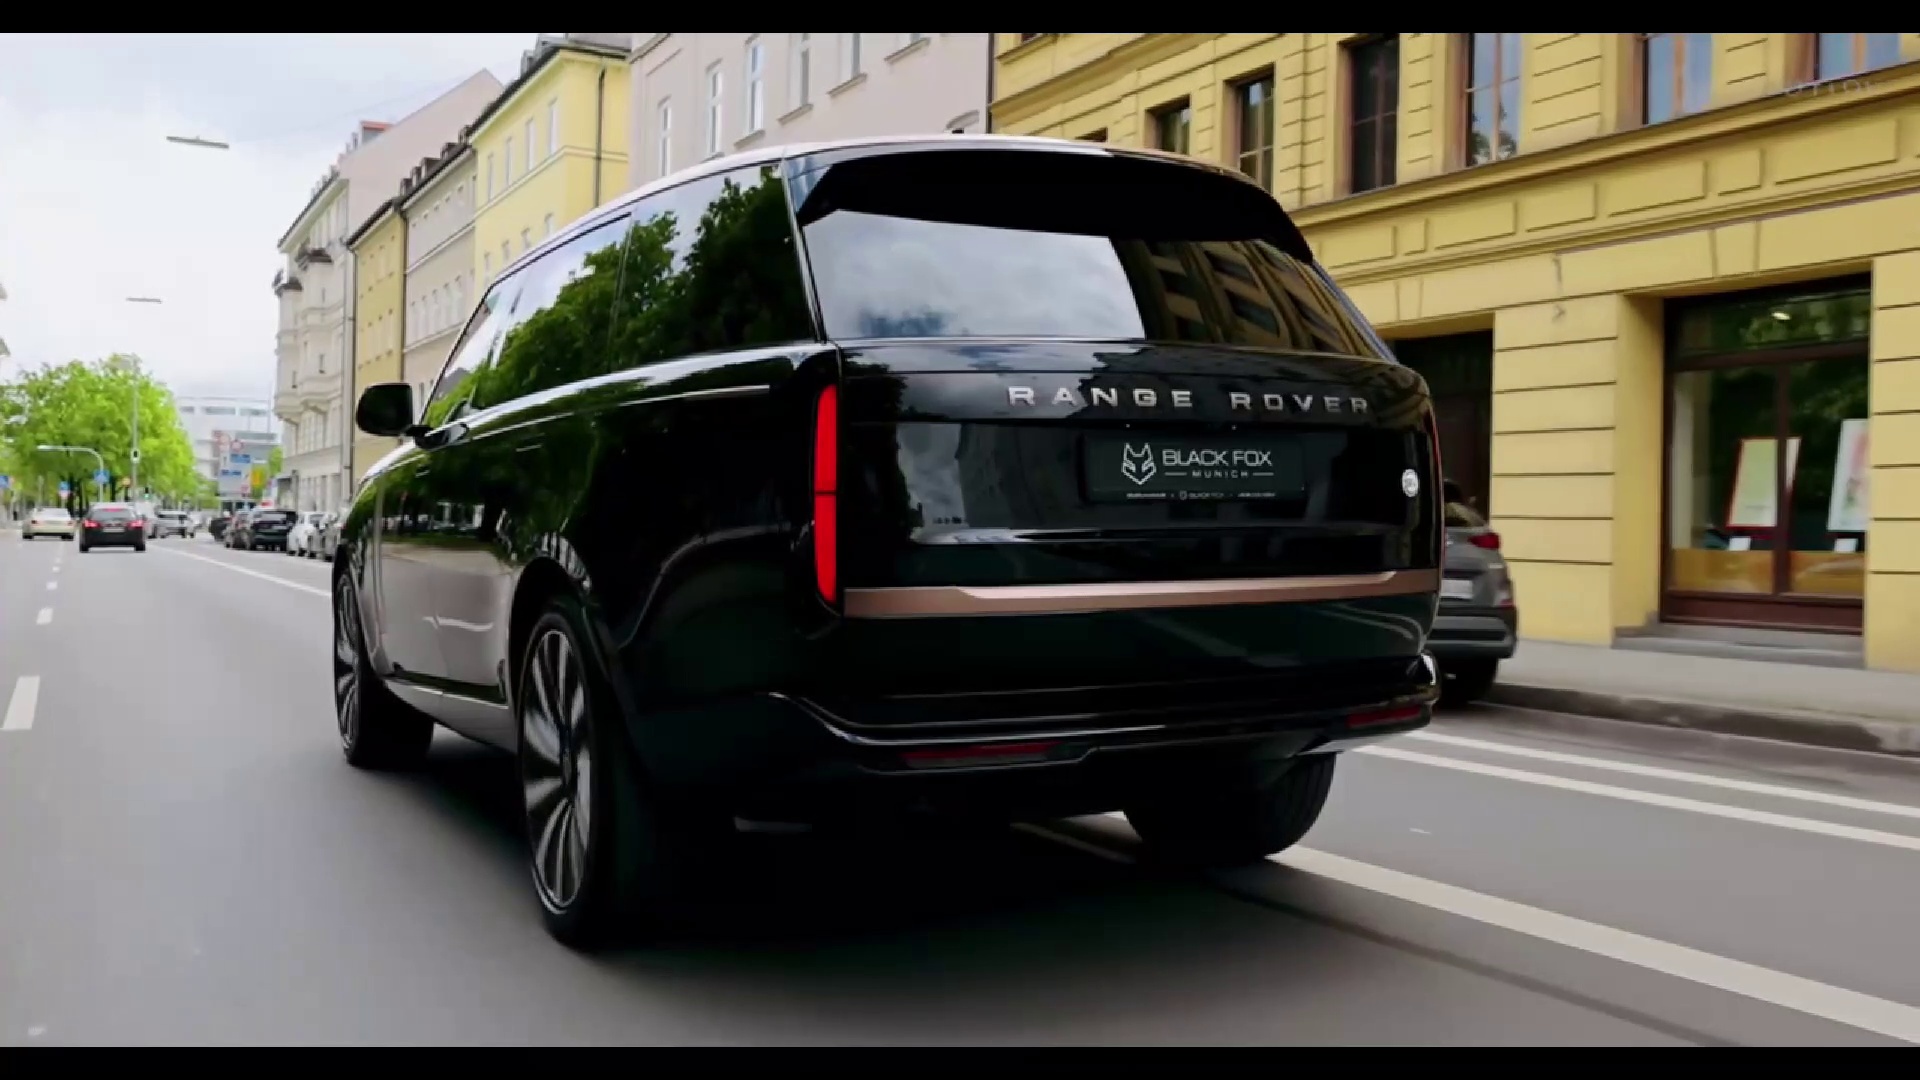 AMAZING FEATURES ABOUT THE NEW RANGE ROVER ELECTRIC 2023